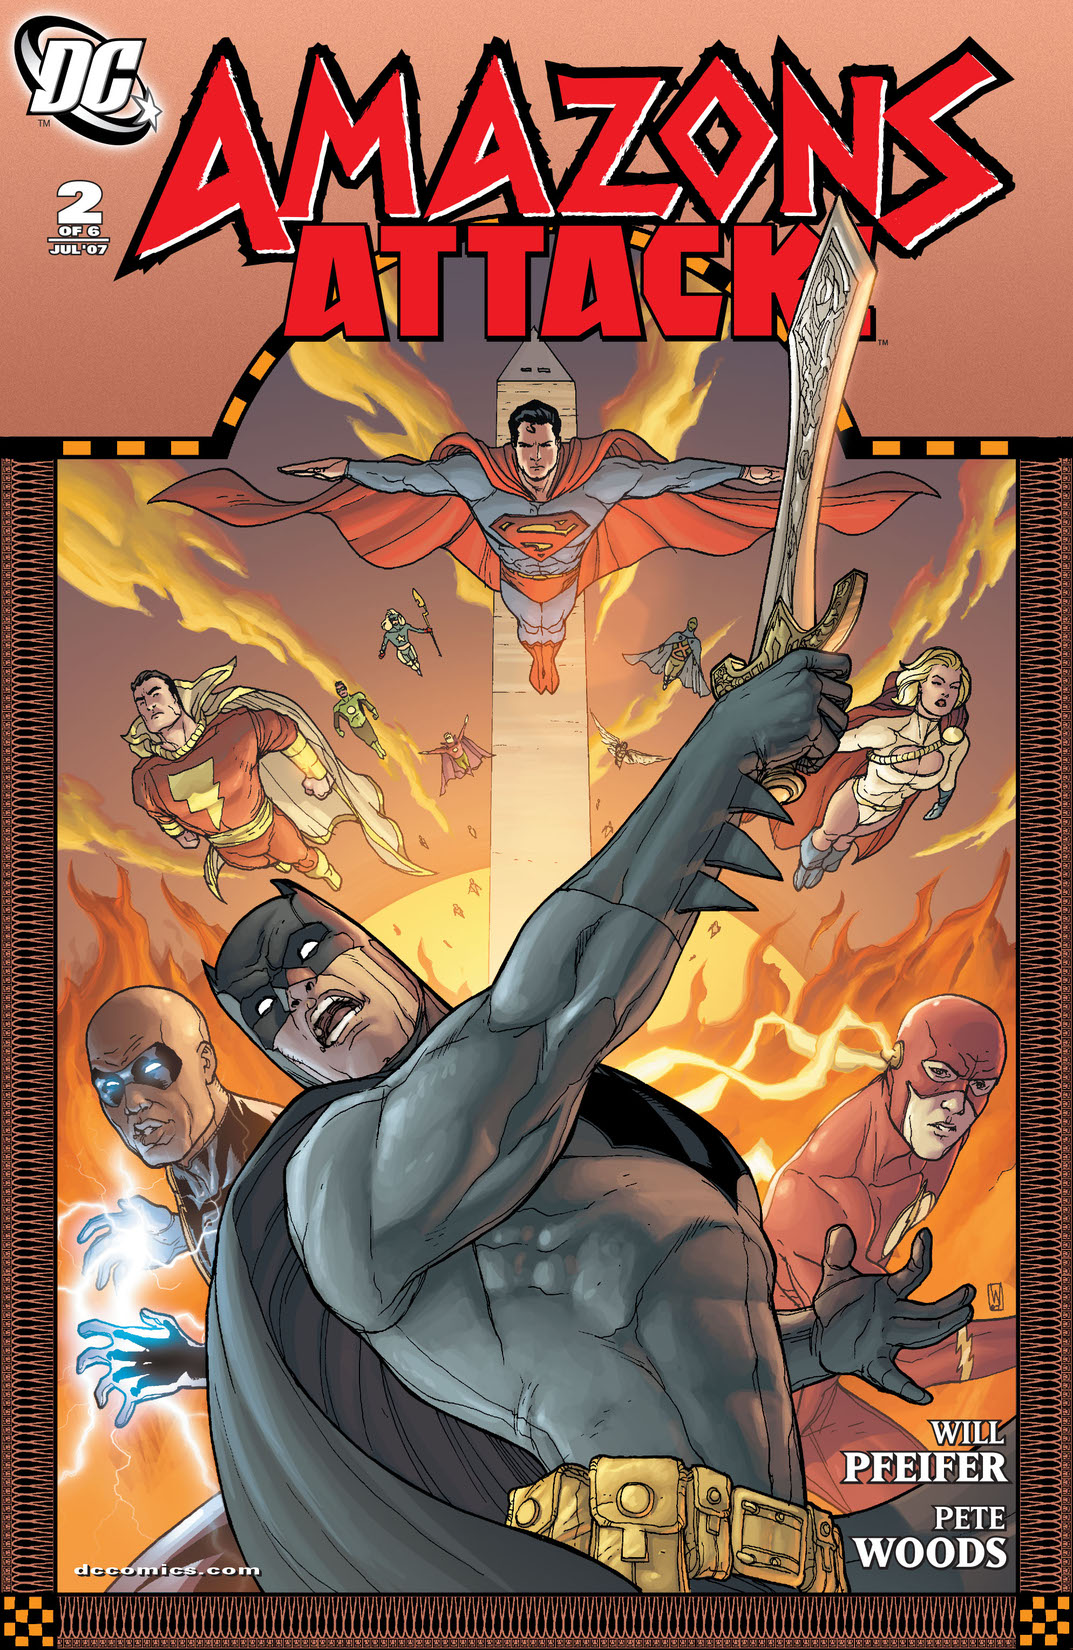 Amazons Attack #2 preview images